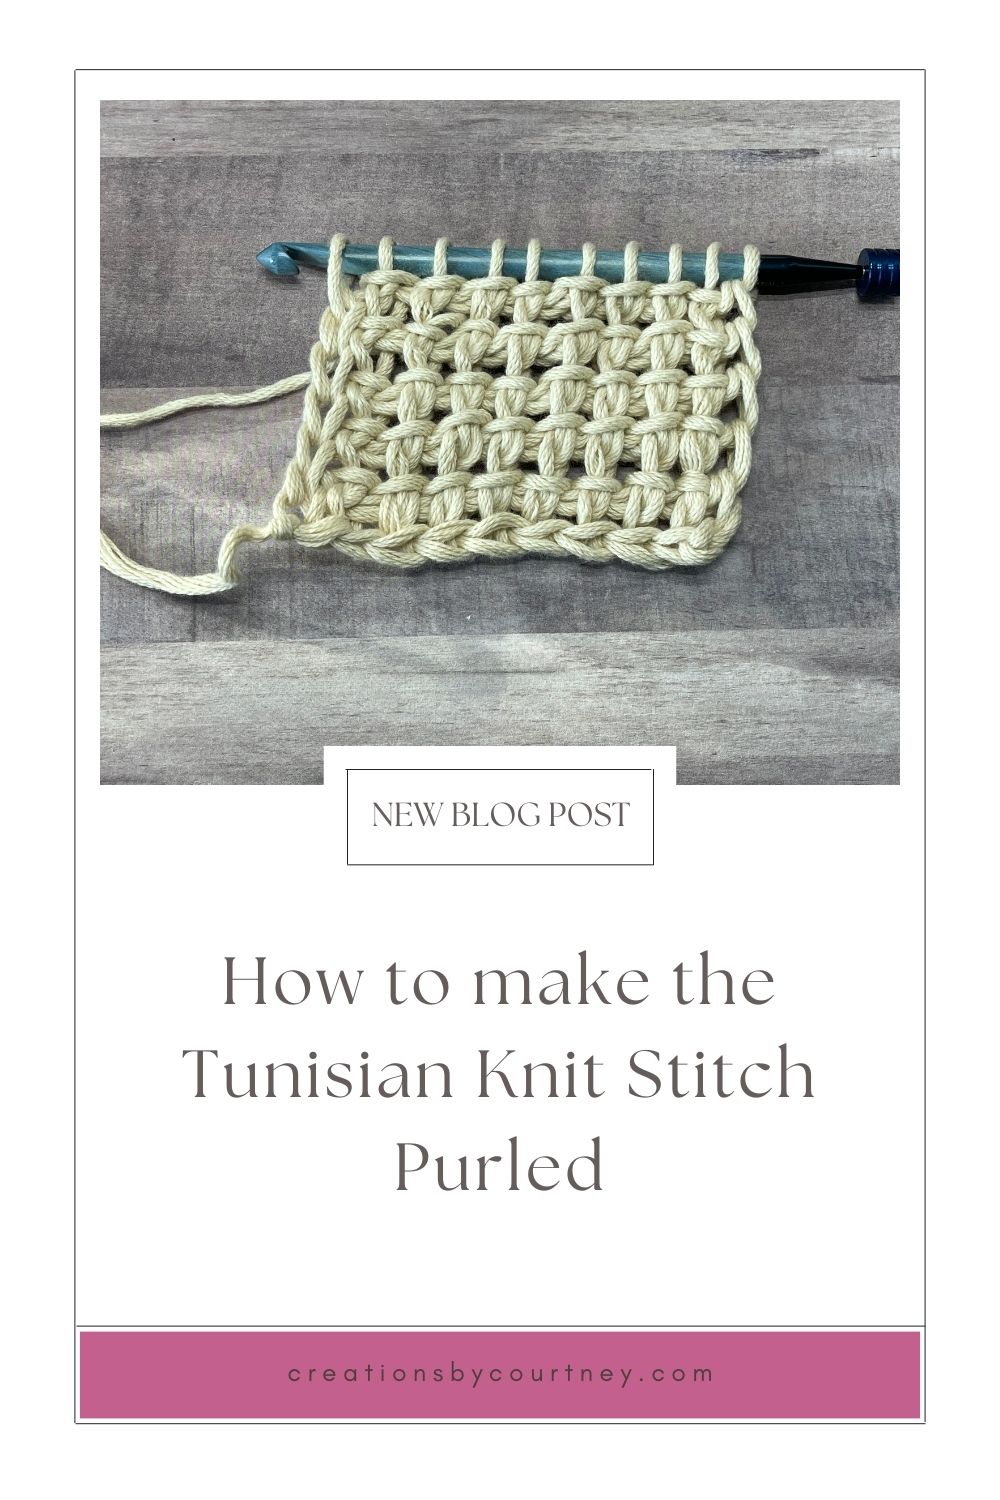 A pin for a crochet tutorial to make the tunisian knit stitch purled, which a a combination of the tunisian knit stitch and tunisian purl stitch.